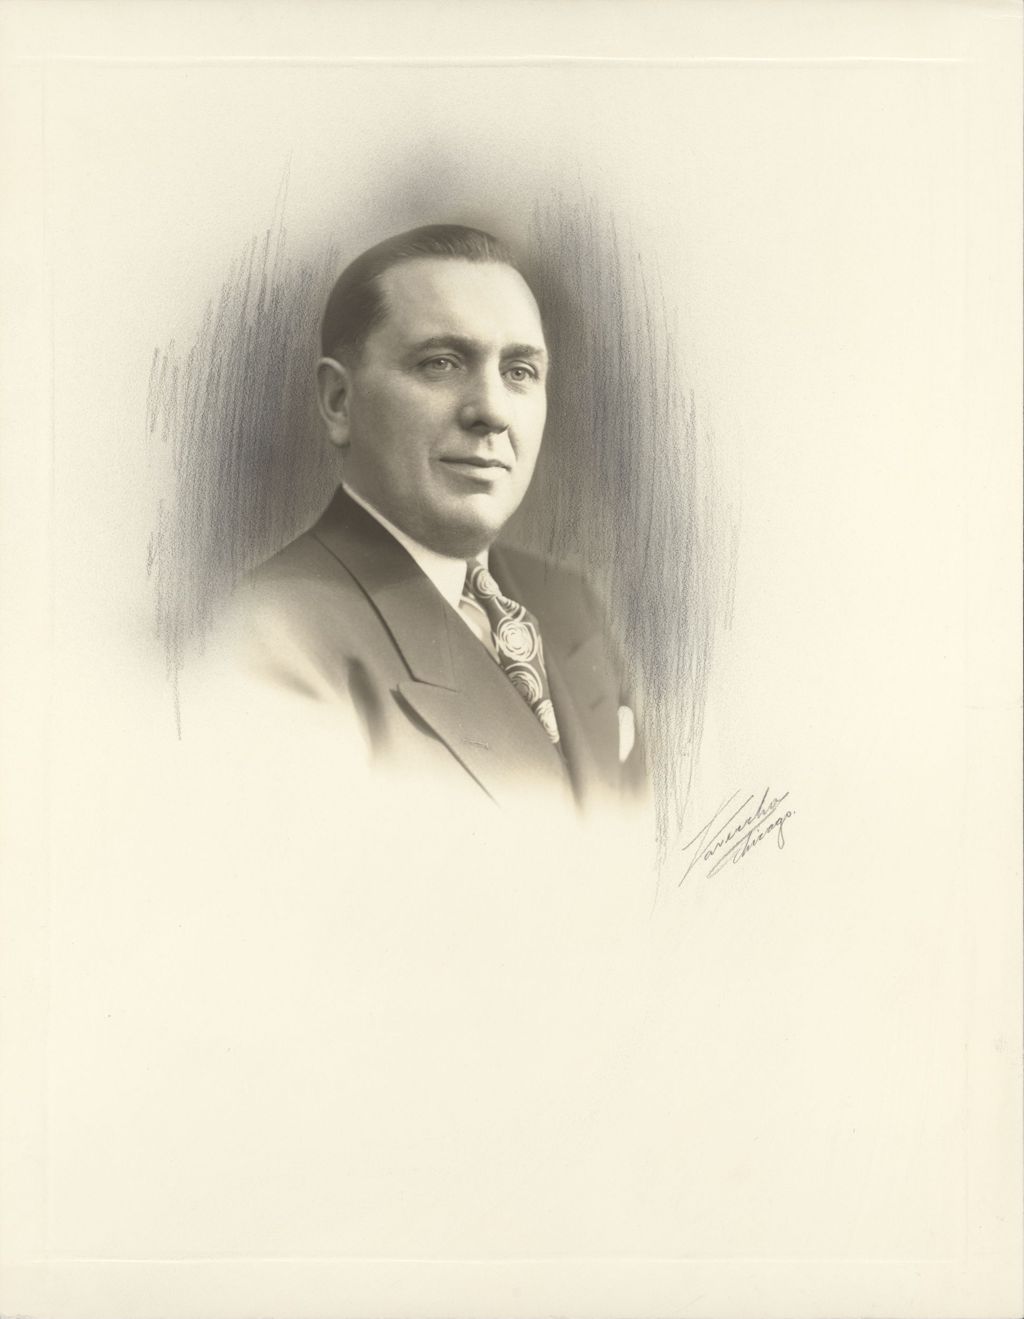 Miniature of Richard J. Daley, pencil shaded background